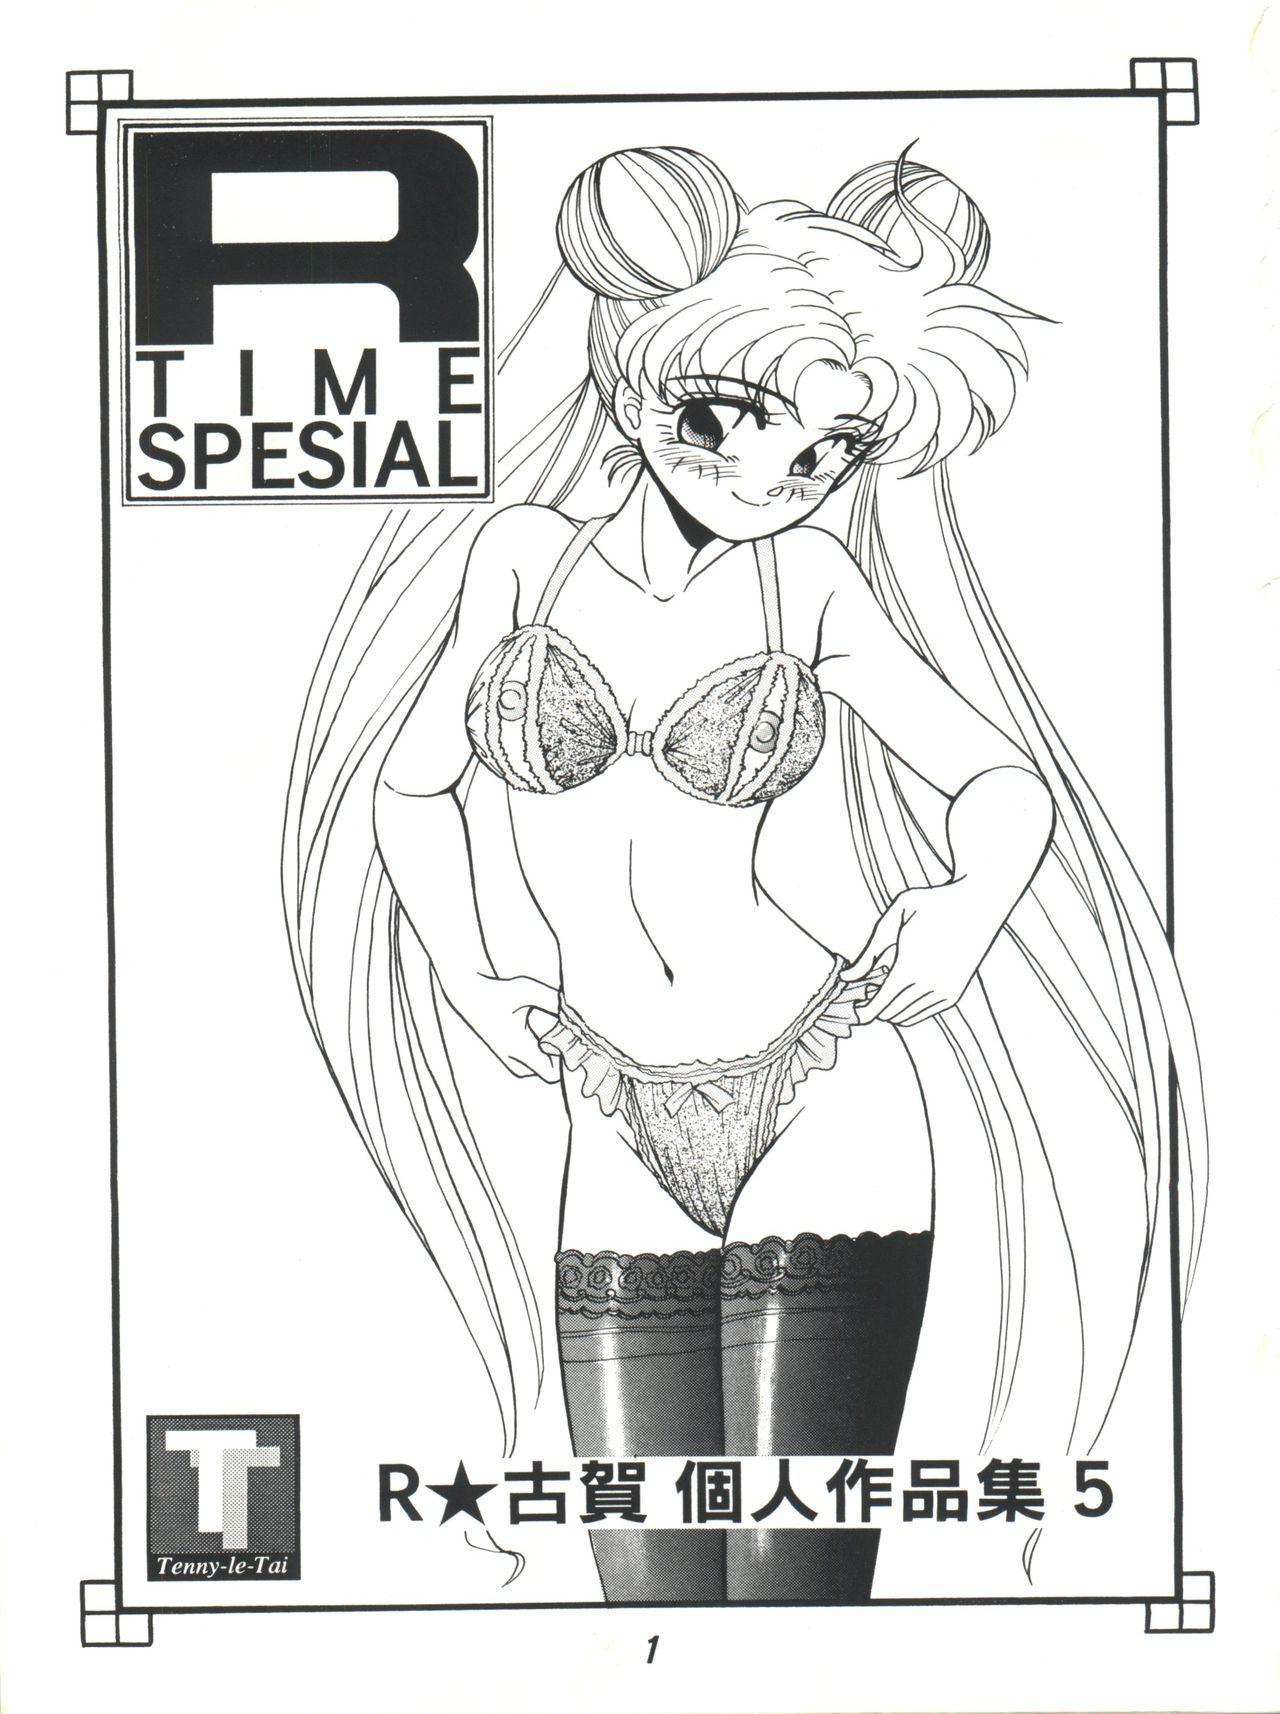 Amateurs Gone Wild R Time Special - Sailor moon Ranma 12 3x3 eyes Obi wo gyuttone Big Natural Tits - Page 3